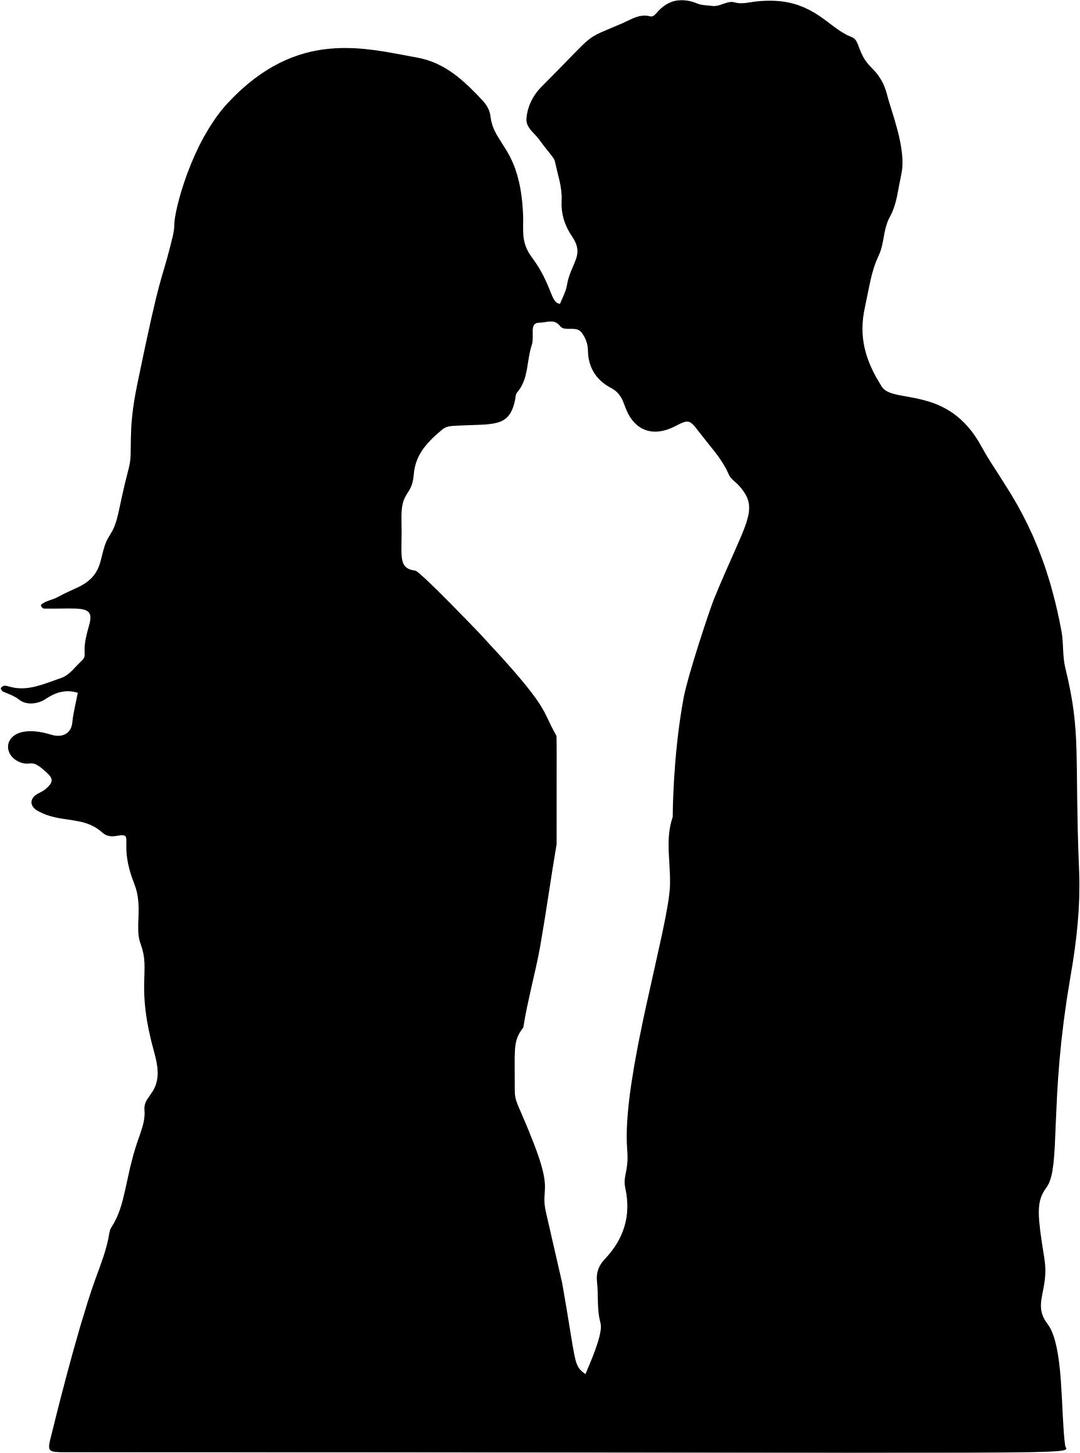 Girlfriend And Boyfriend Silhouette png transparent